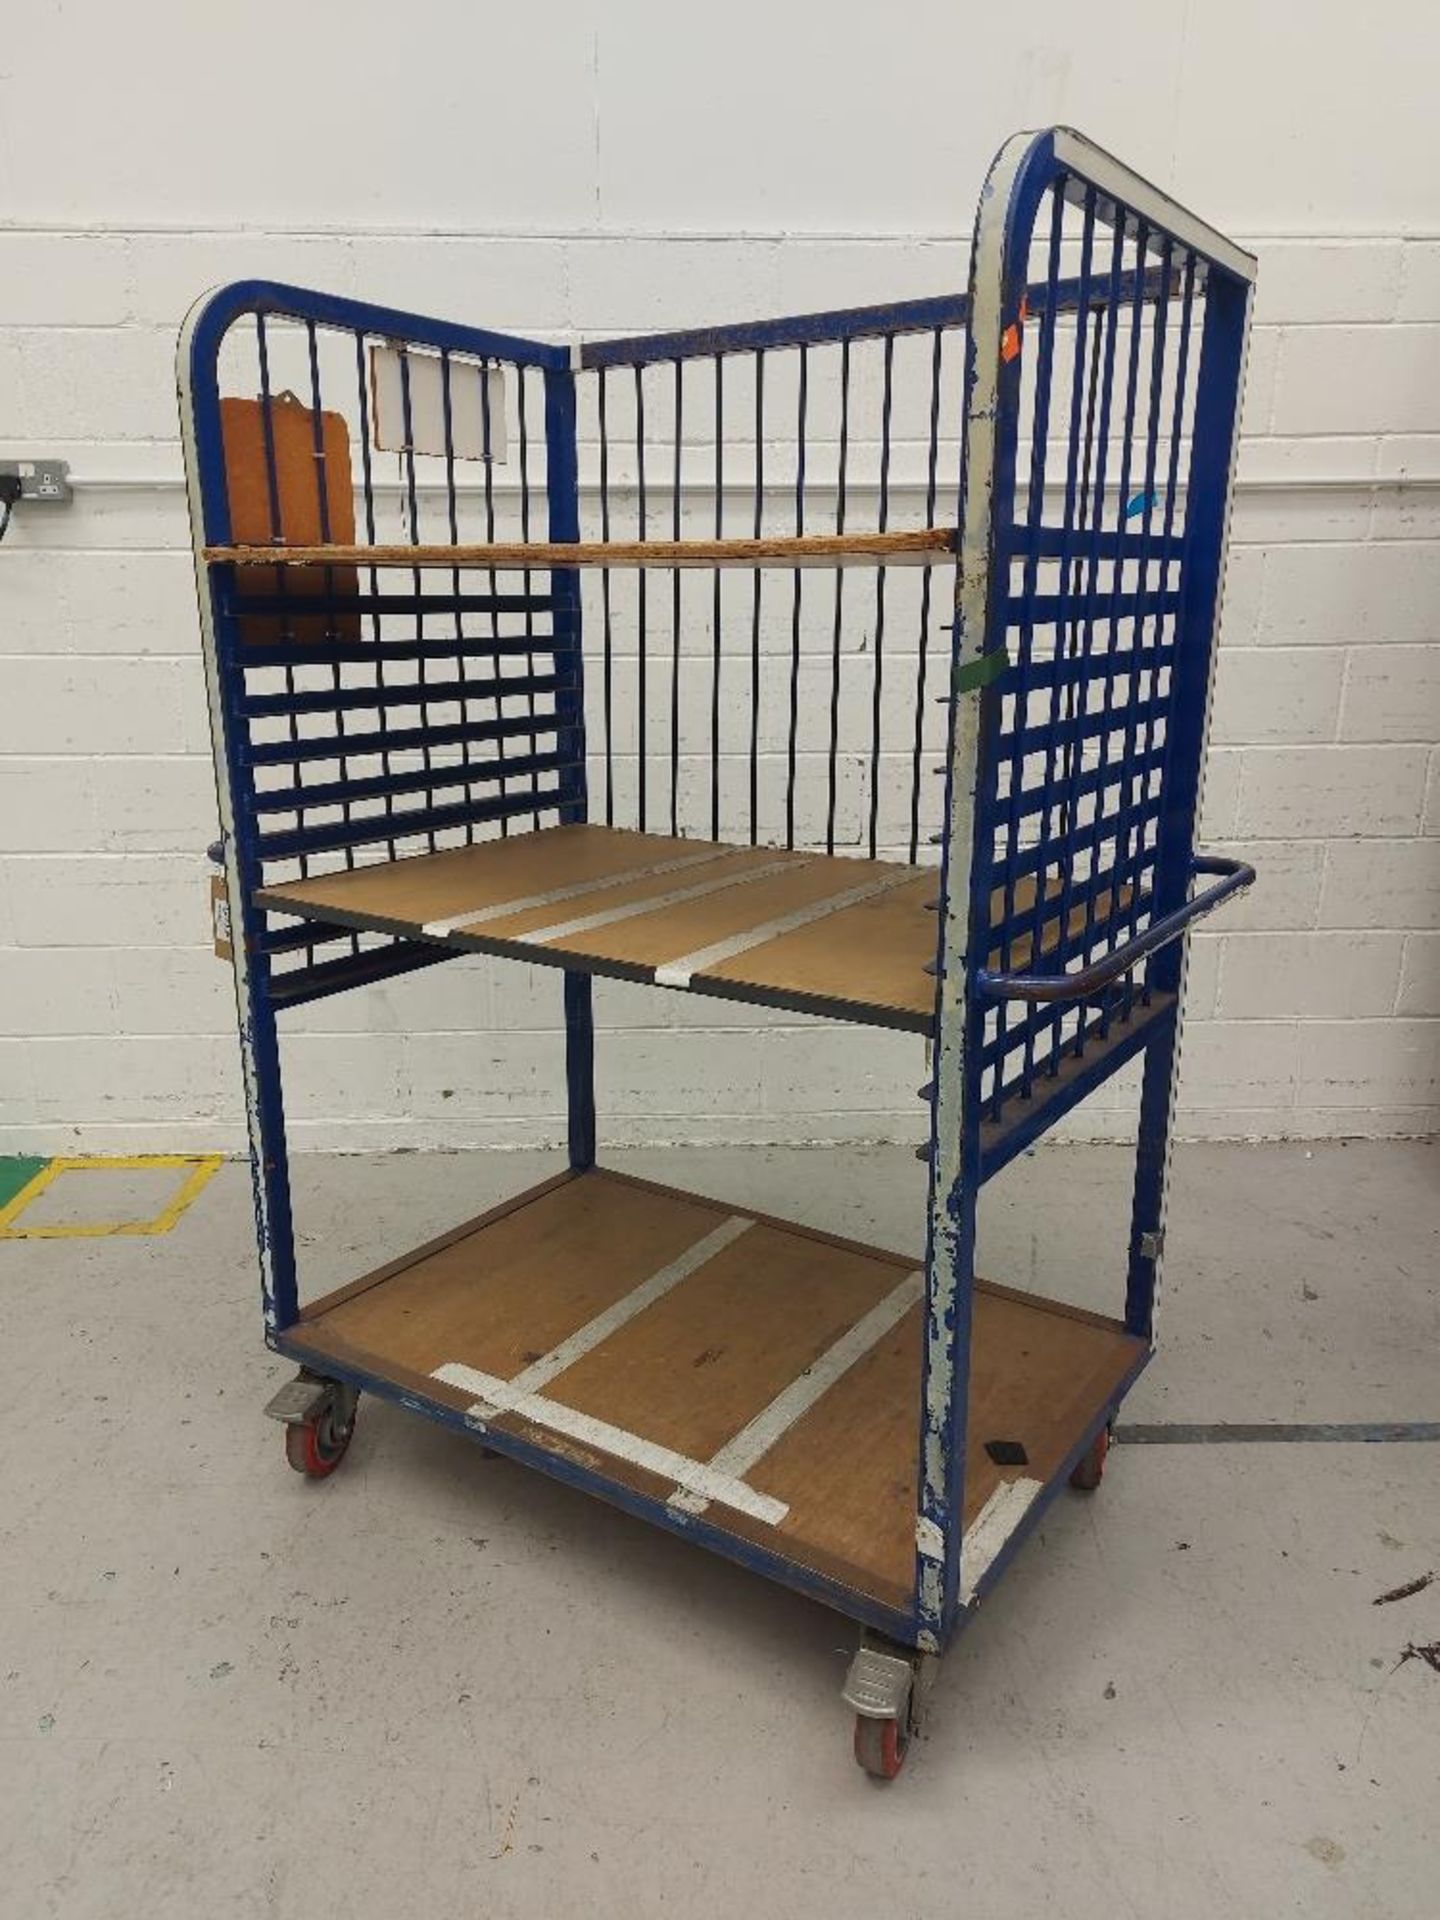 3 Tier Warehouse Cage Trolley